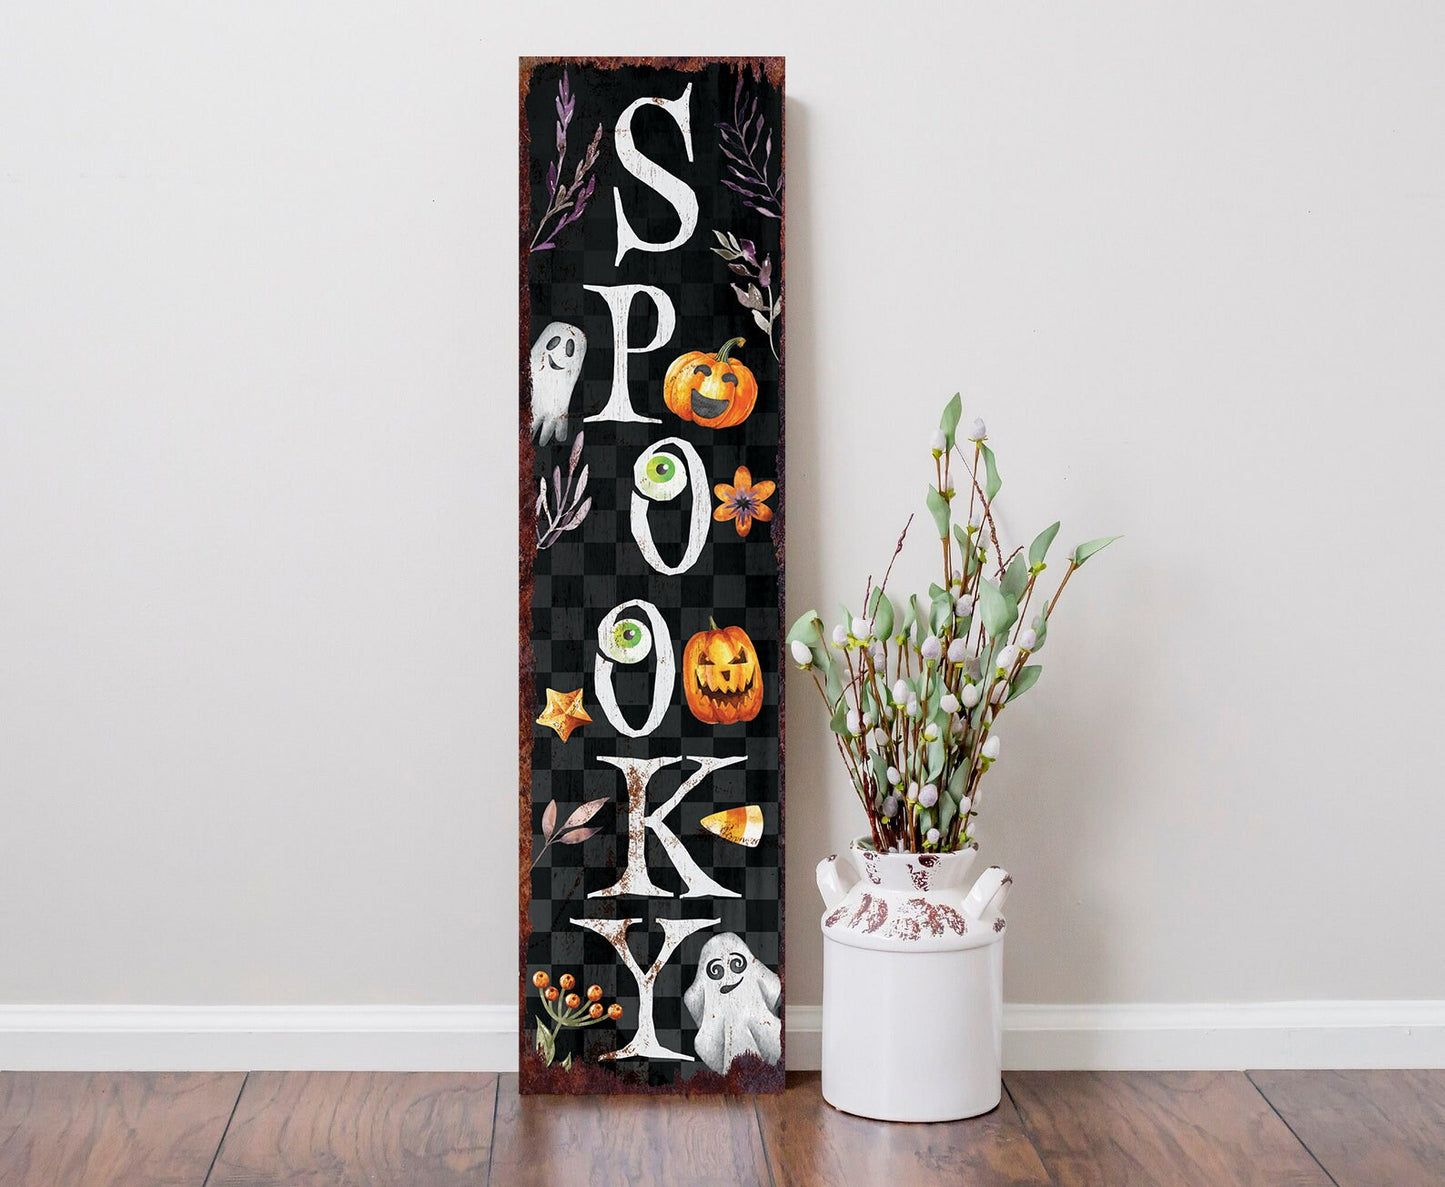 36in Spooky Halloween Porch Sign - Front Porch Halloween Sign, Vintage Halloween Decoration, Rustic Modern Farmhouse Entryway Board